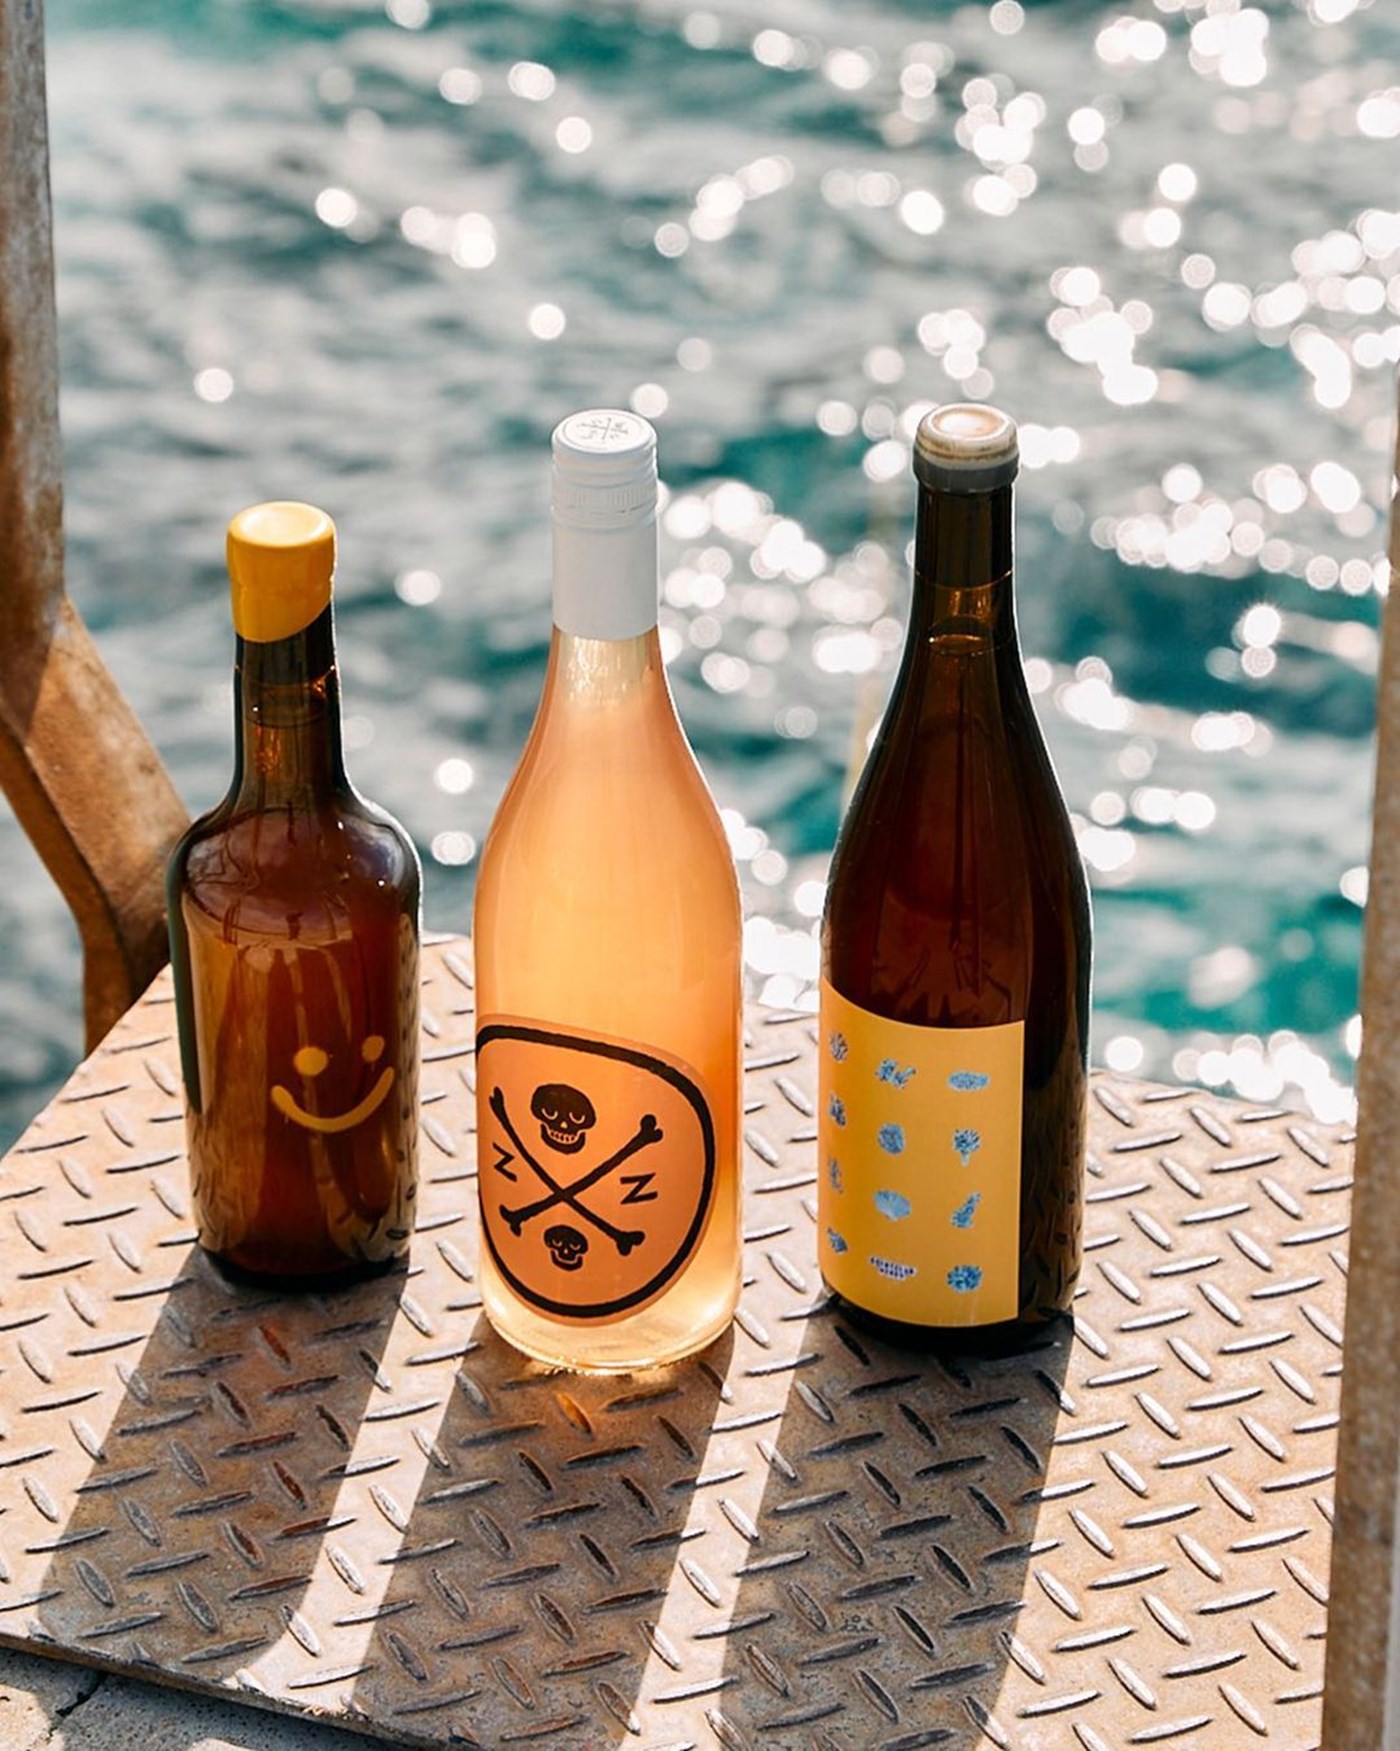 Three bottles of natural wines sitting on a metal grate with the ocean in the background